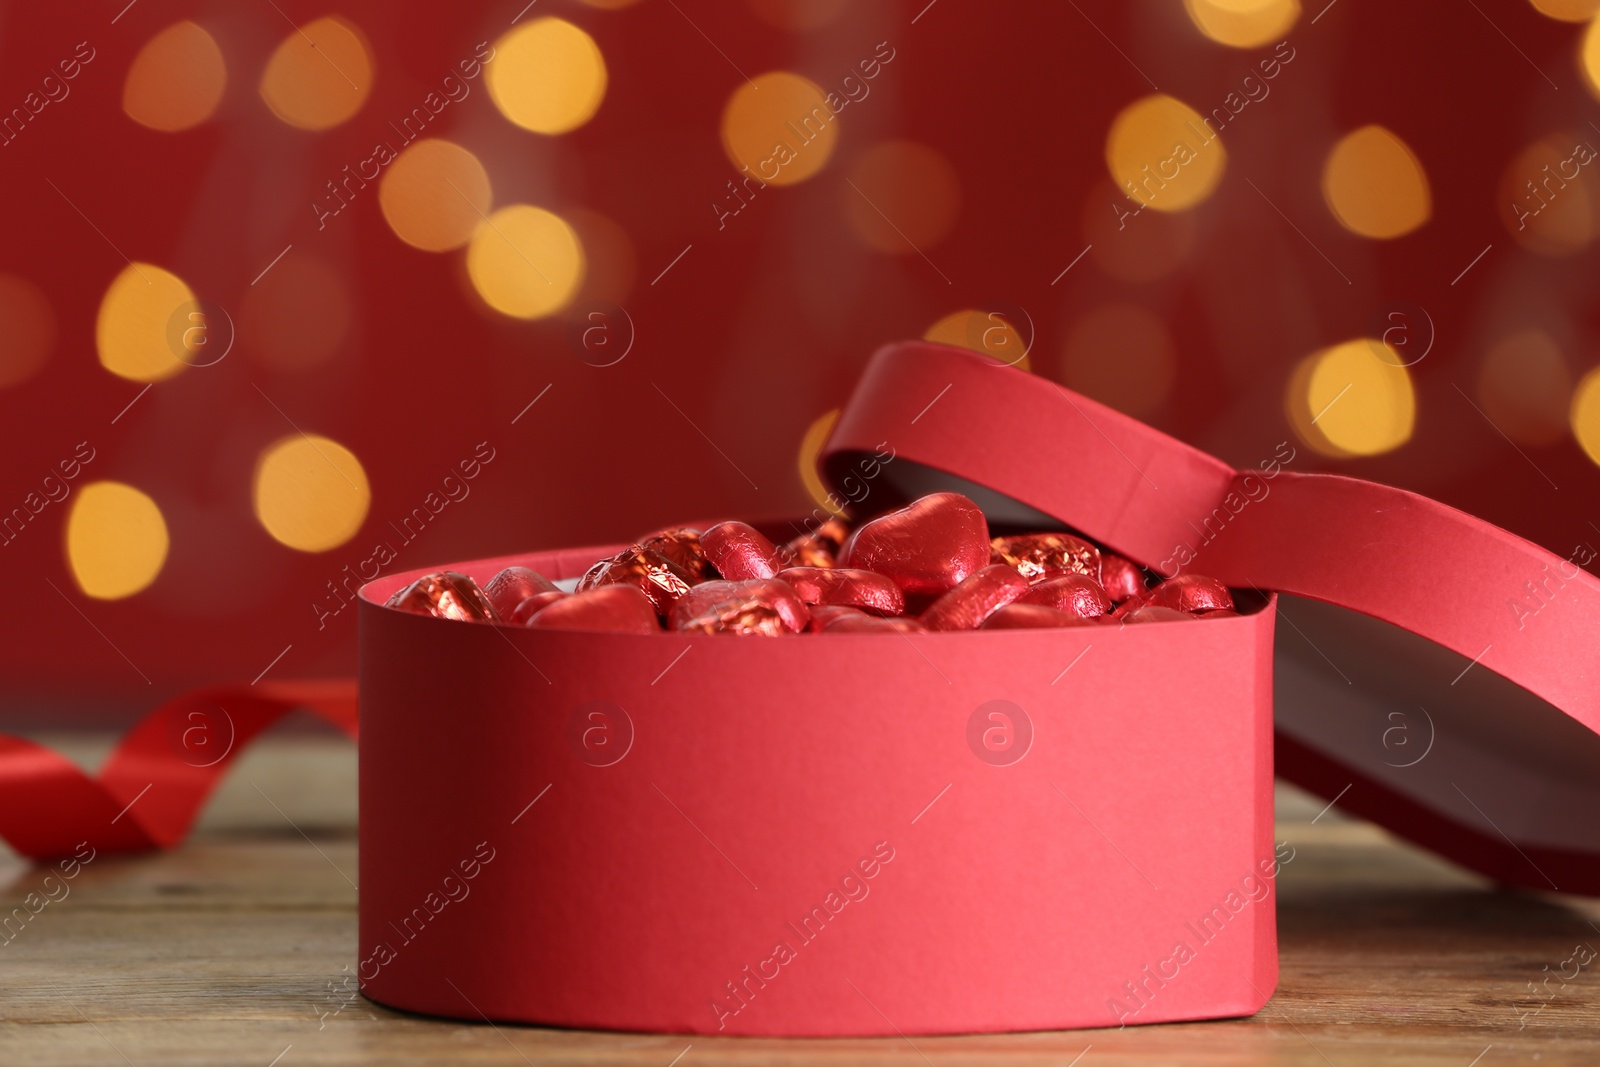 Photo of Heart shaped chocolate candies in gift box on table against blurred lights. Valentines's day celebration